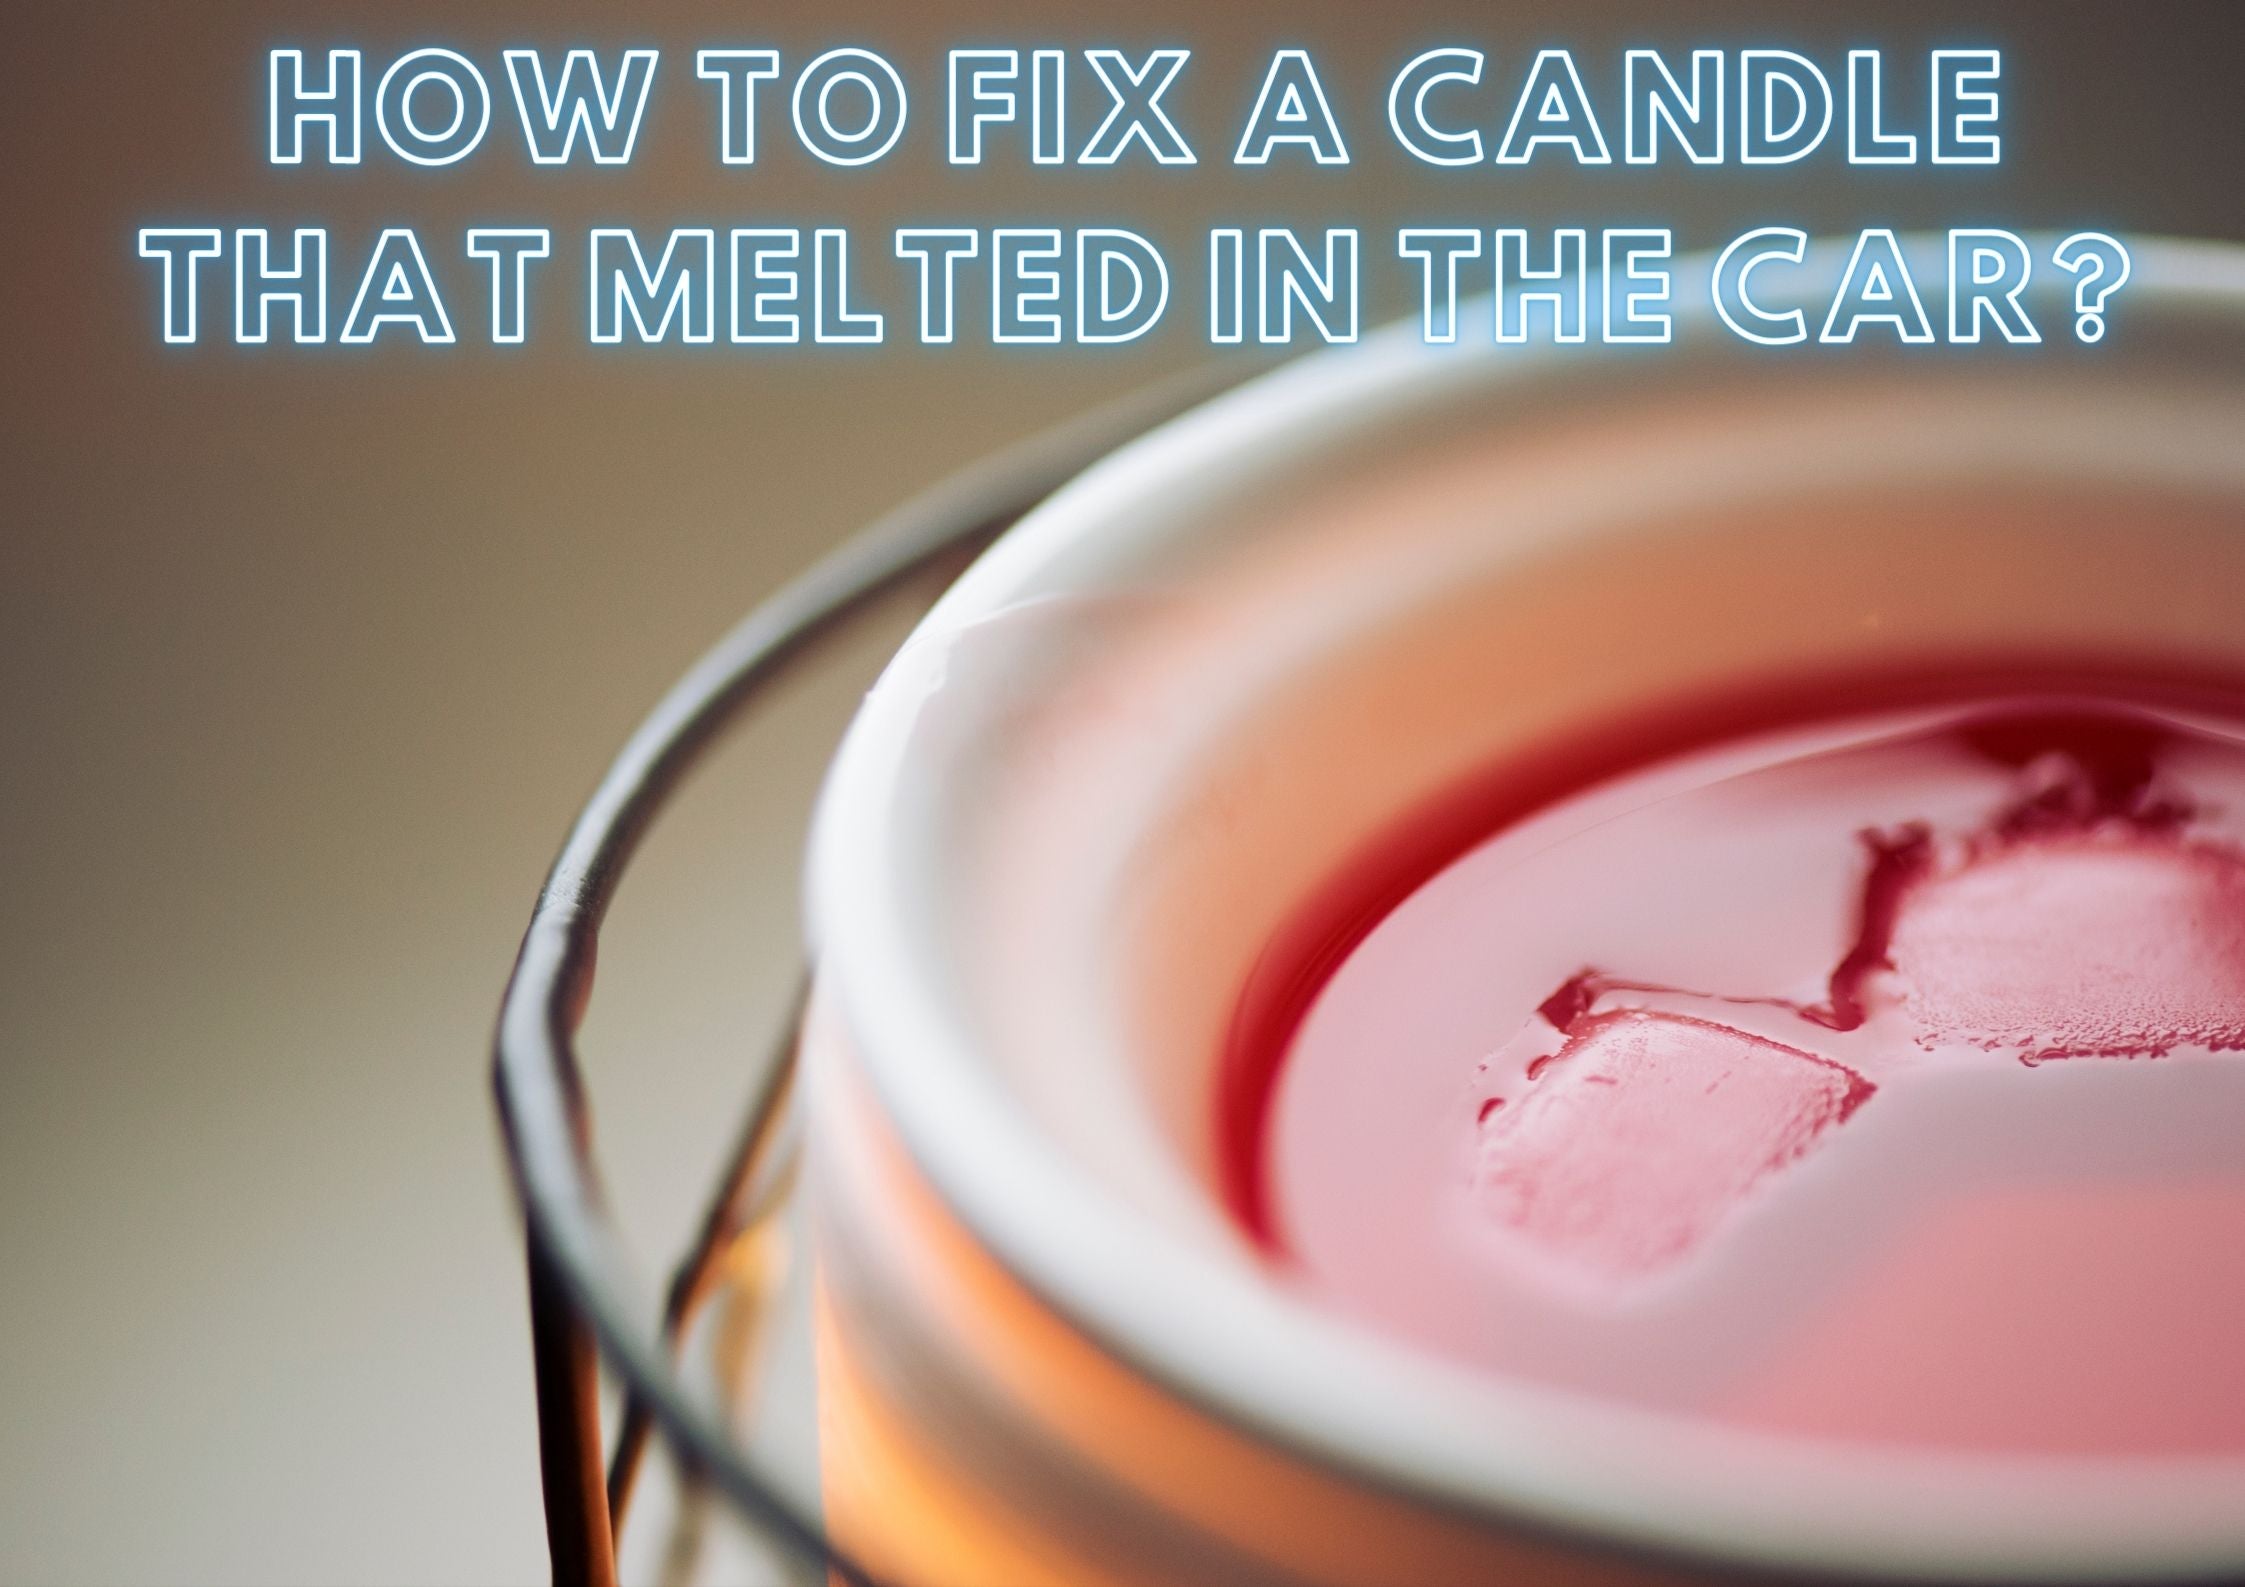 How to fix a candle that melted in the car?